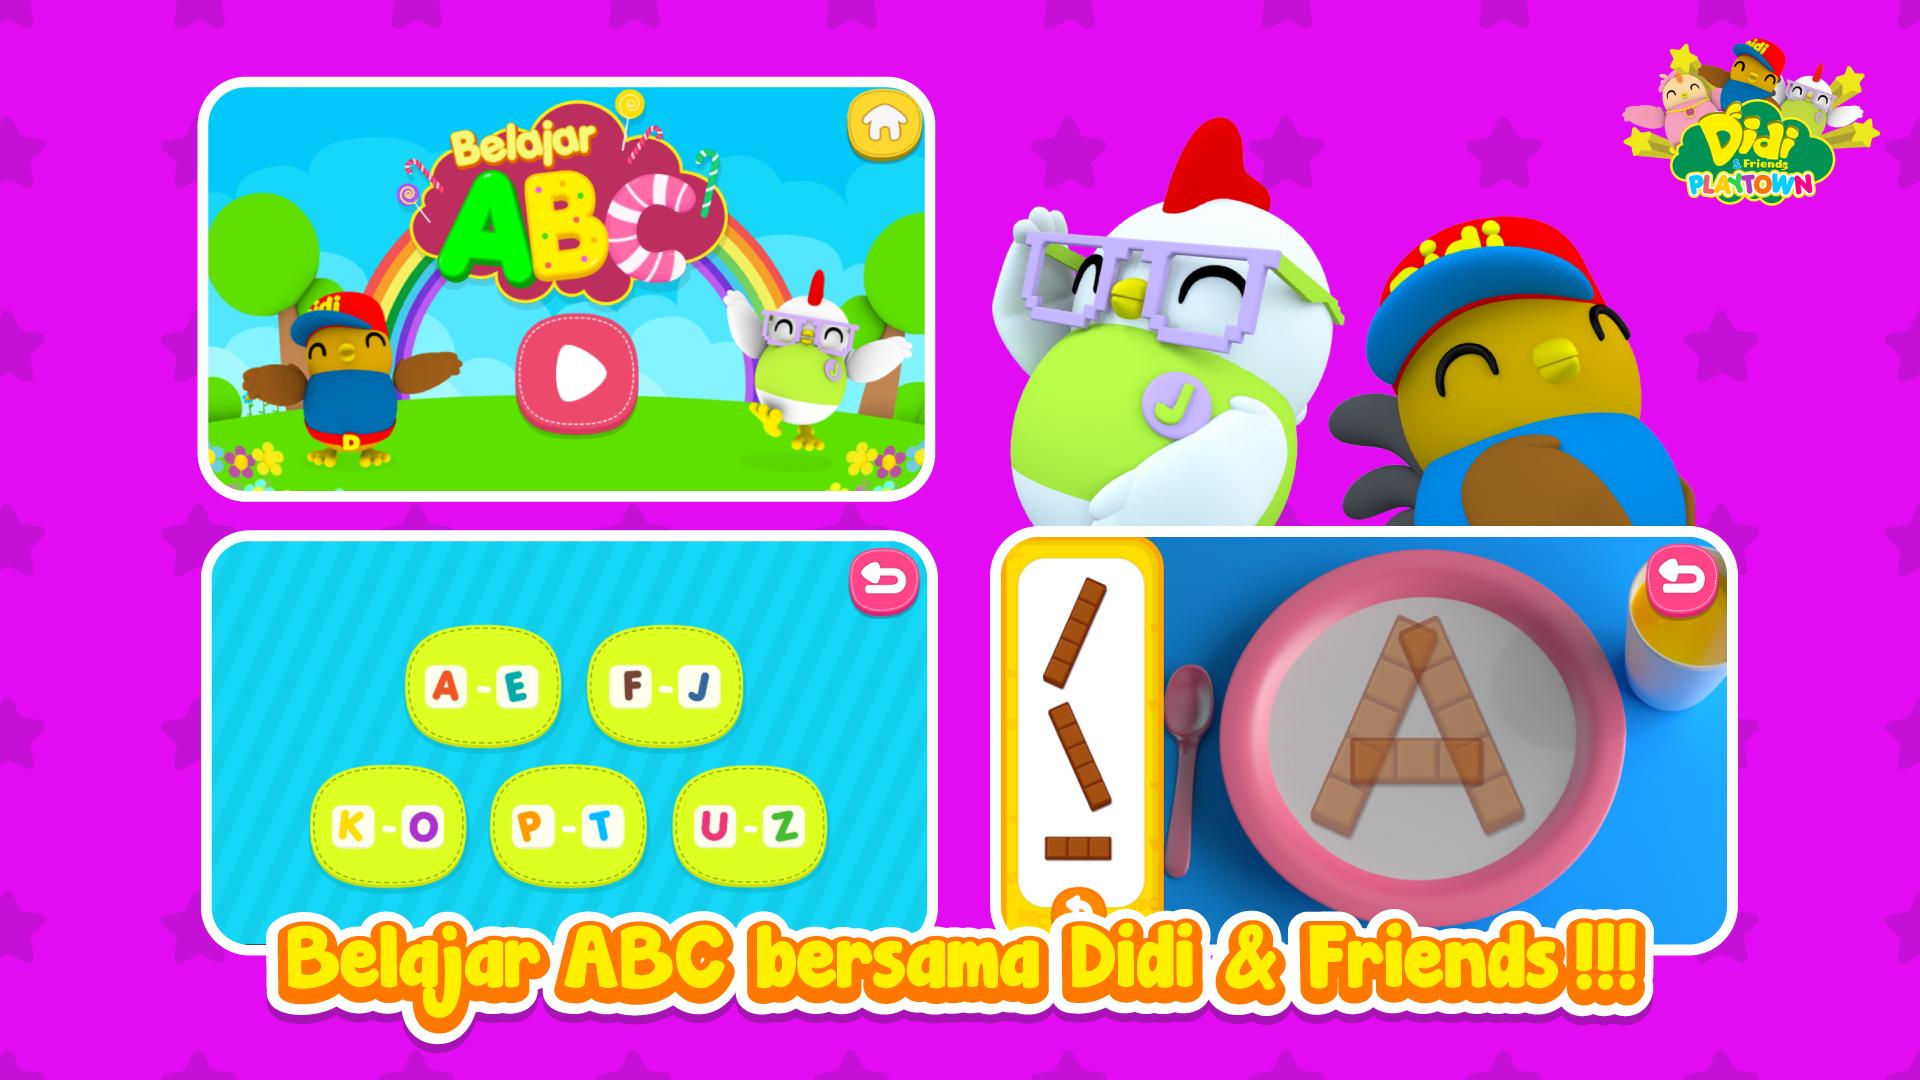 Didi Friends Playtown For Android Apk Download